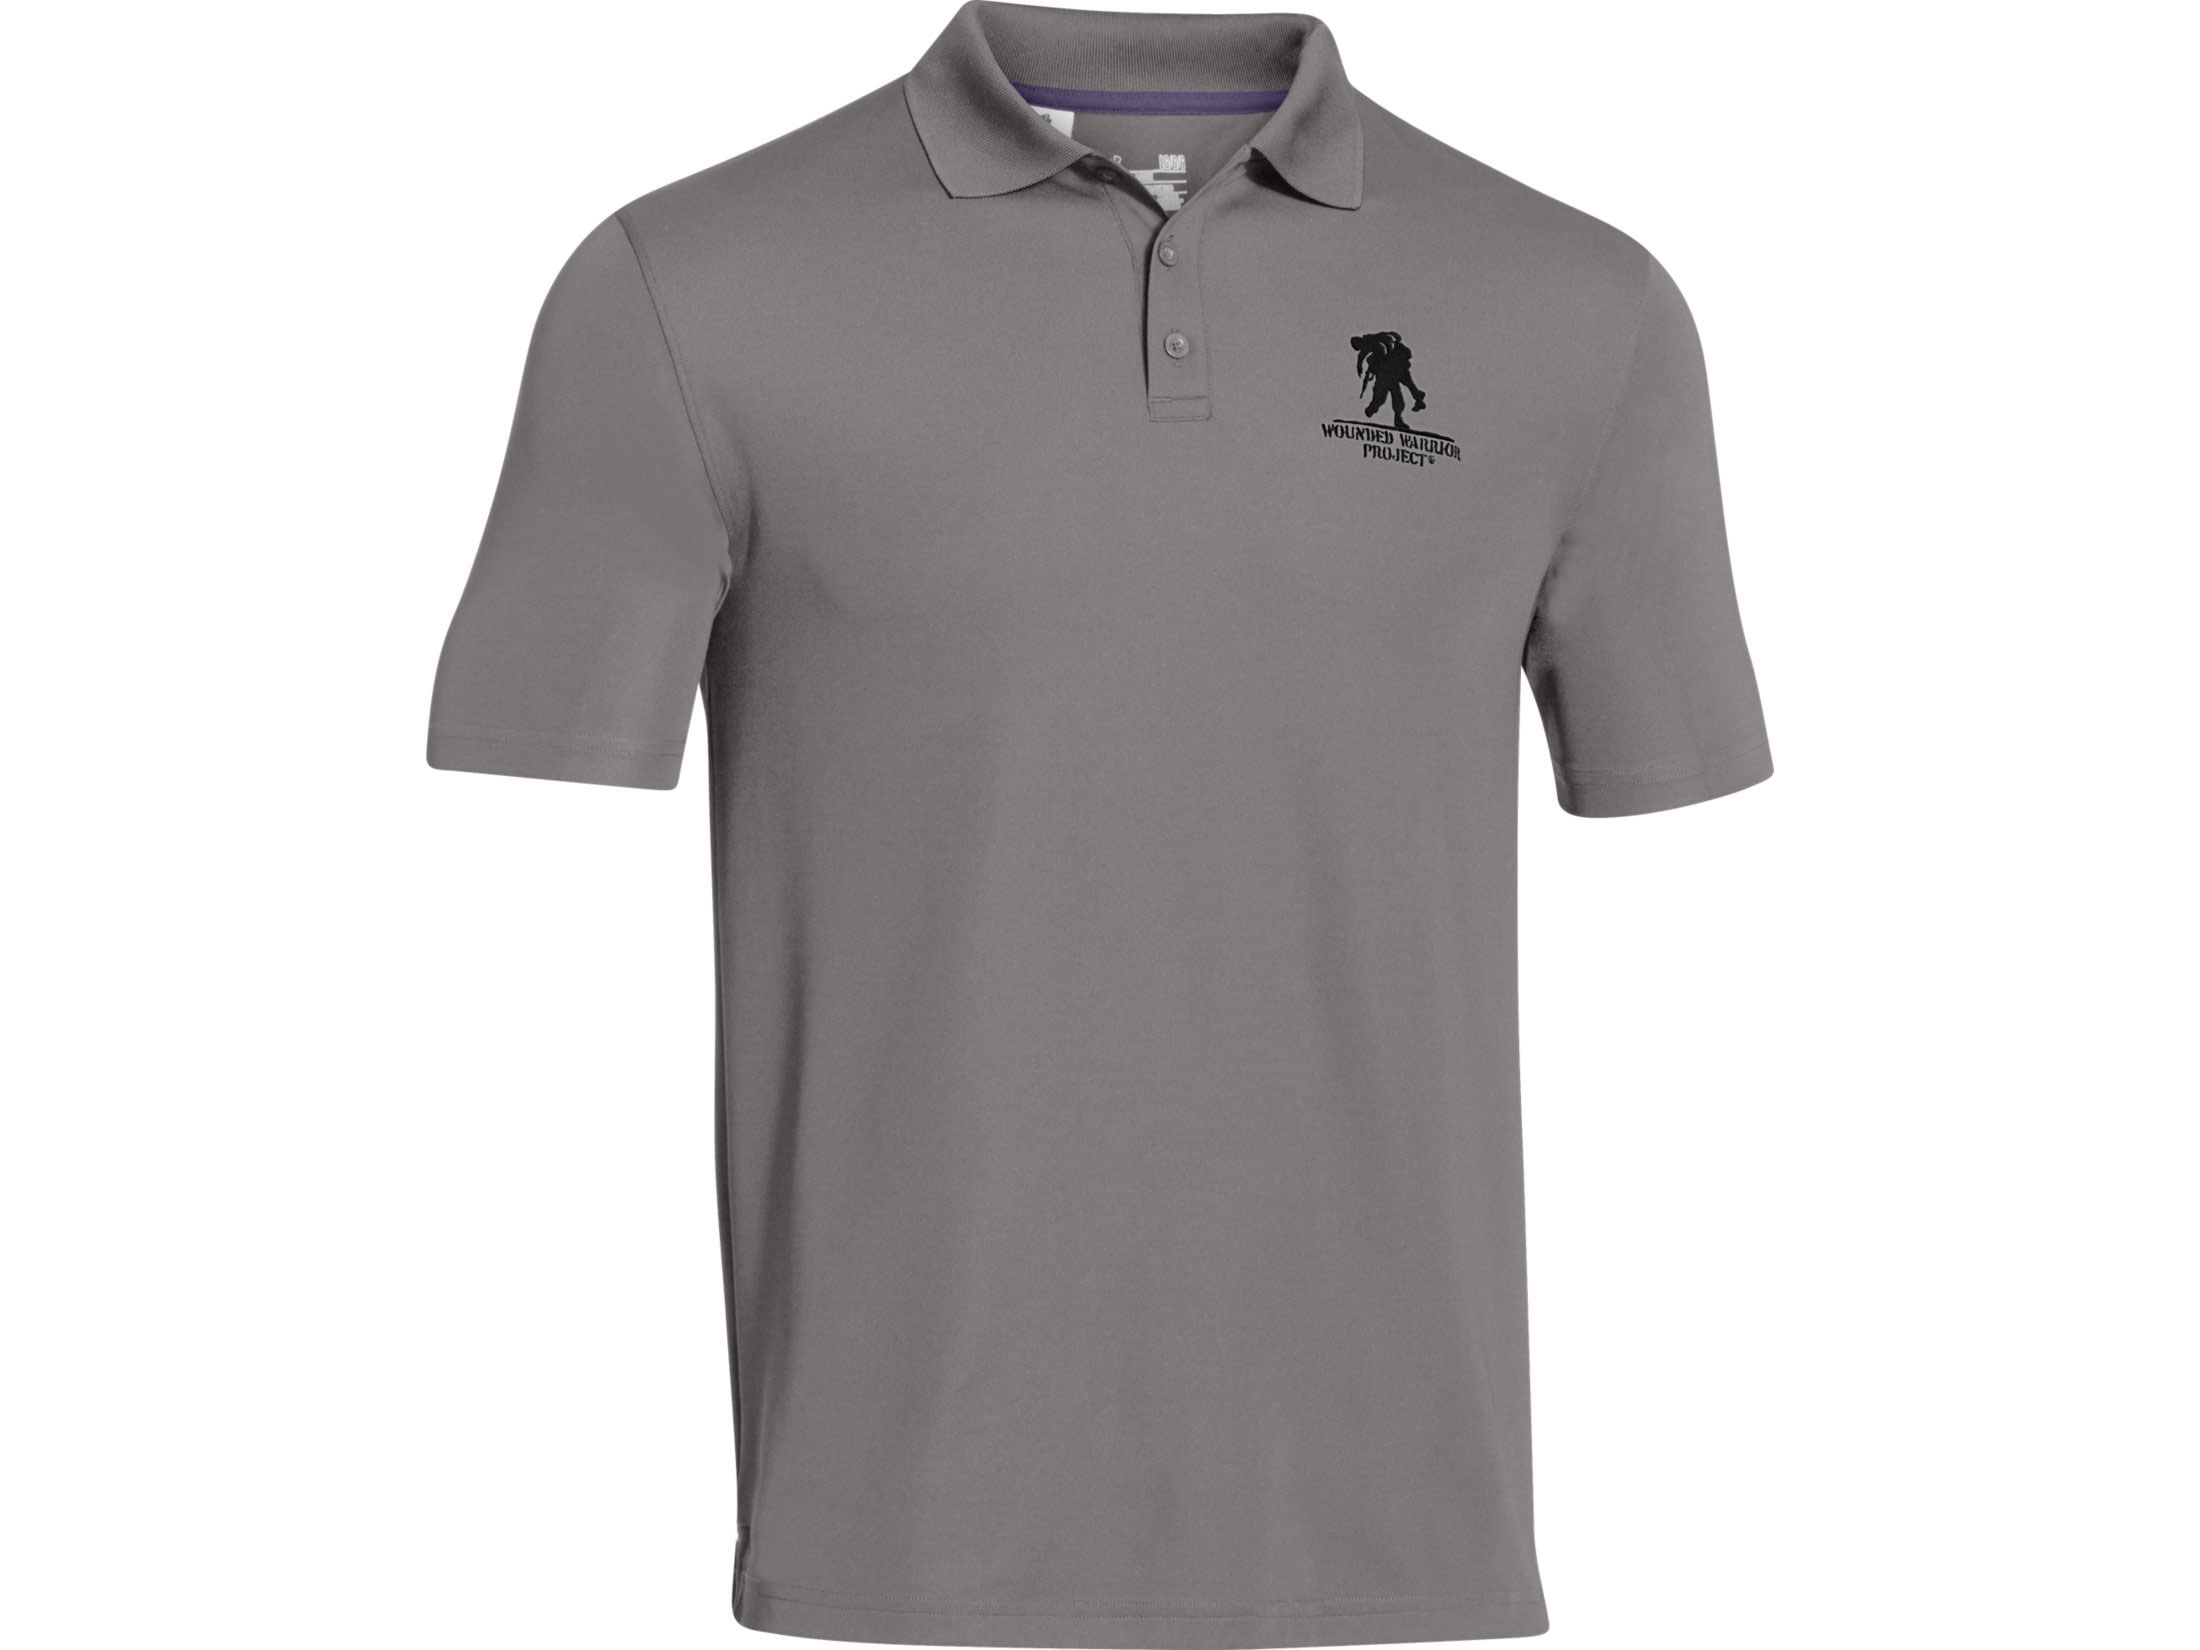 wounded warrior project polo